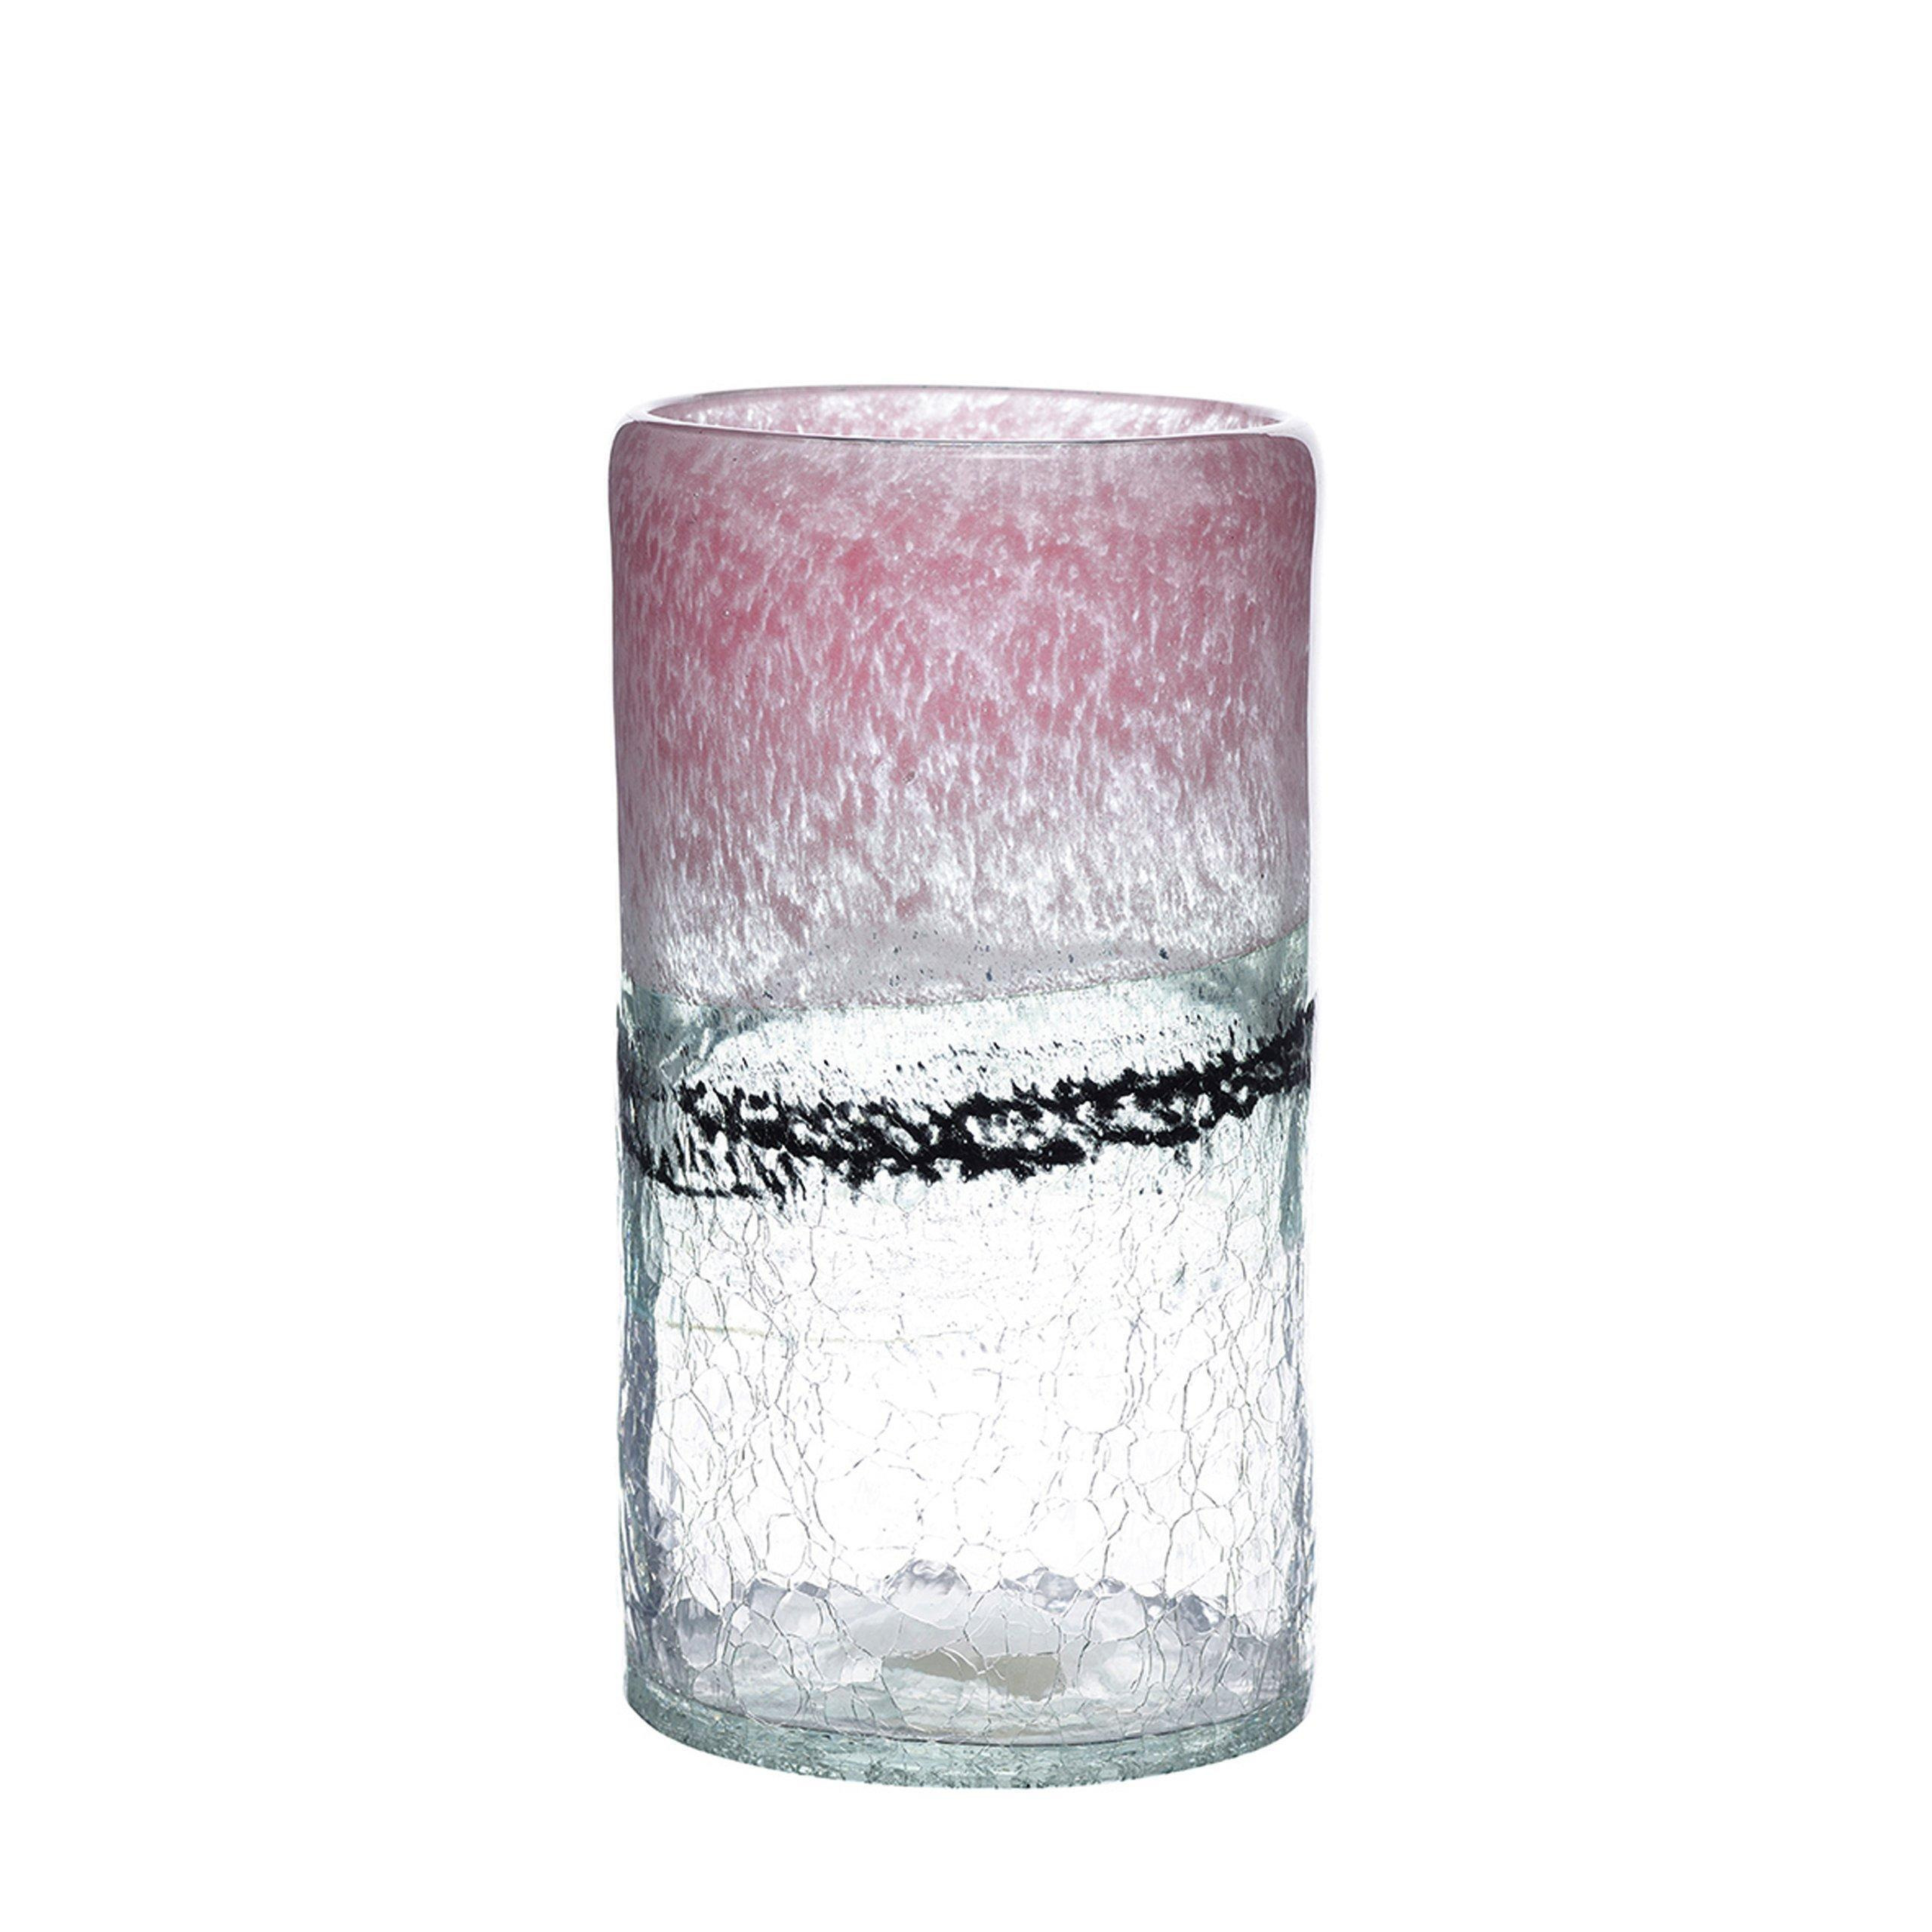 Dusk Hand-Blown Small Glass Vase - image 1